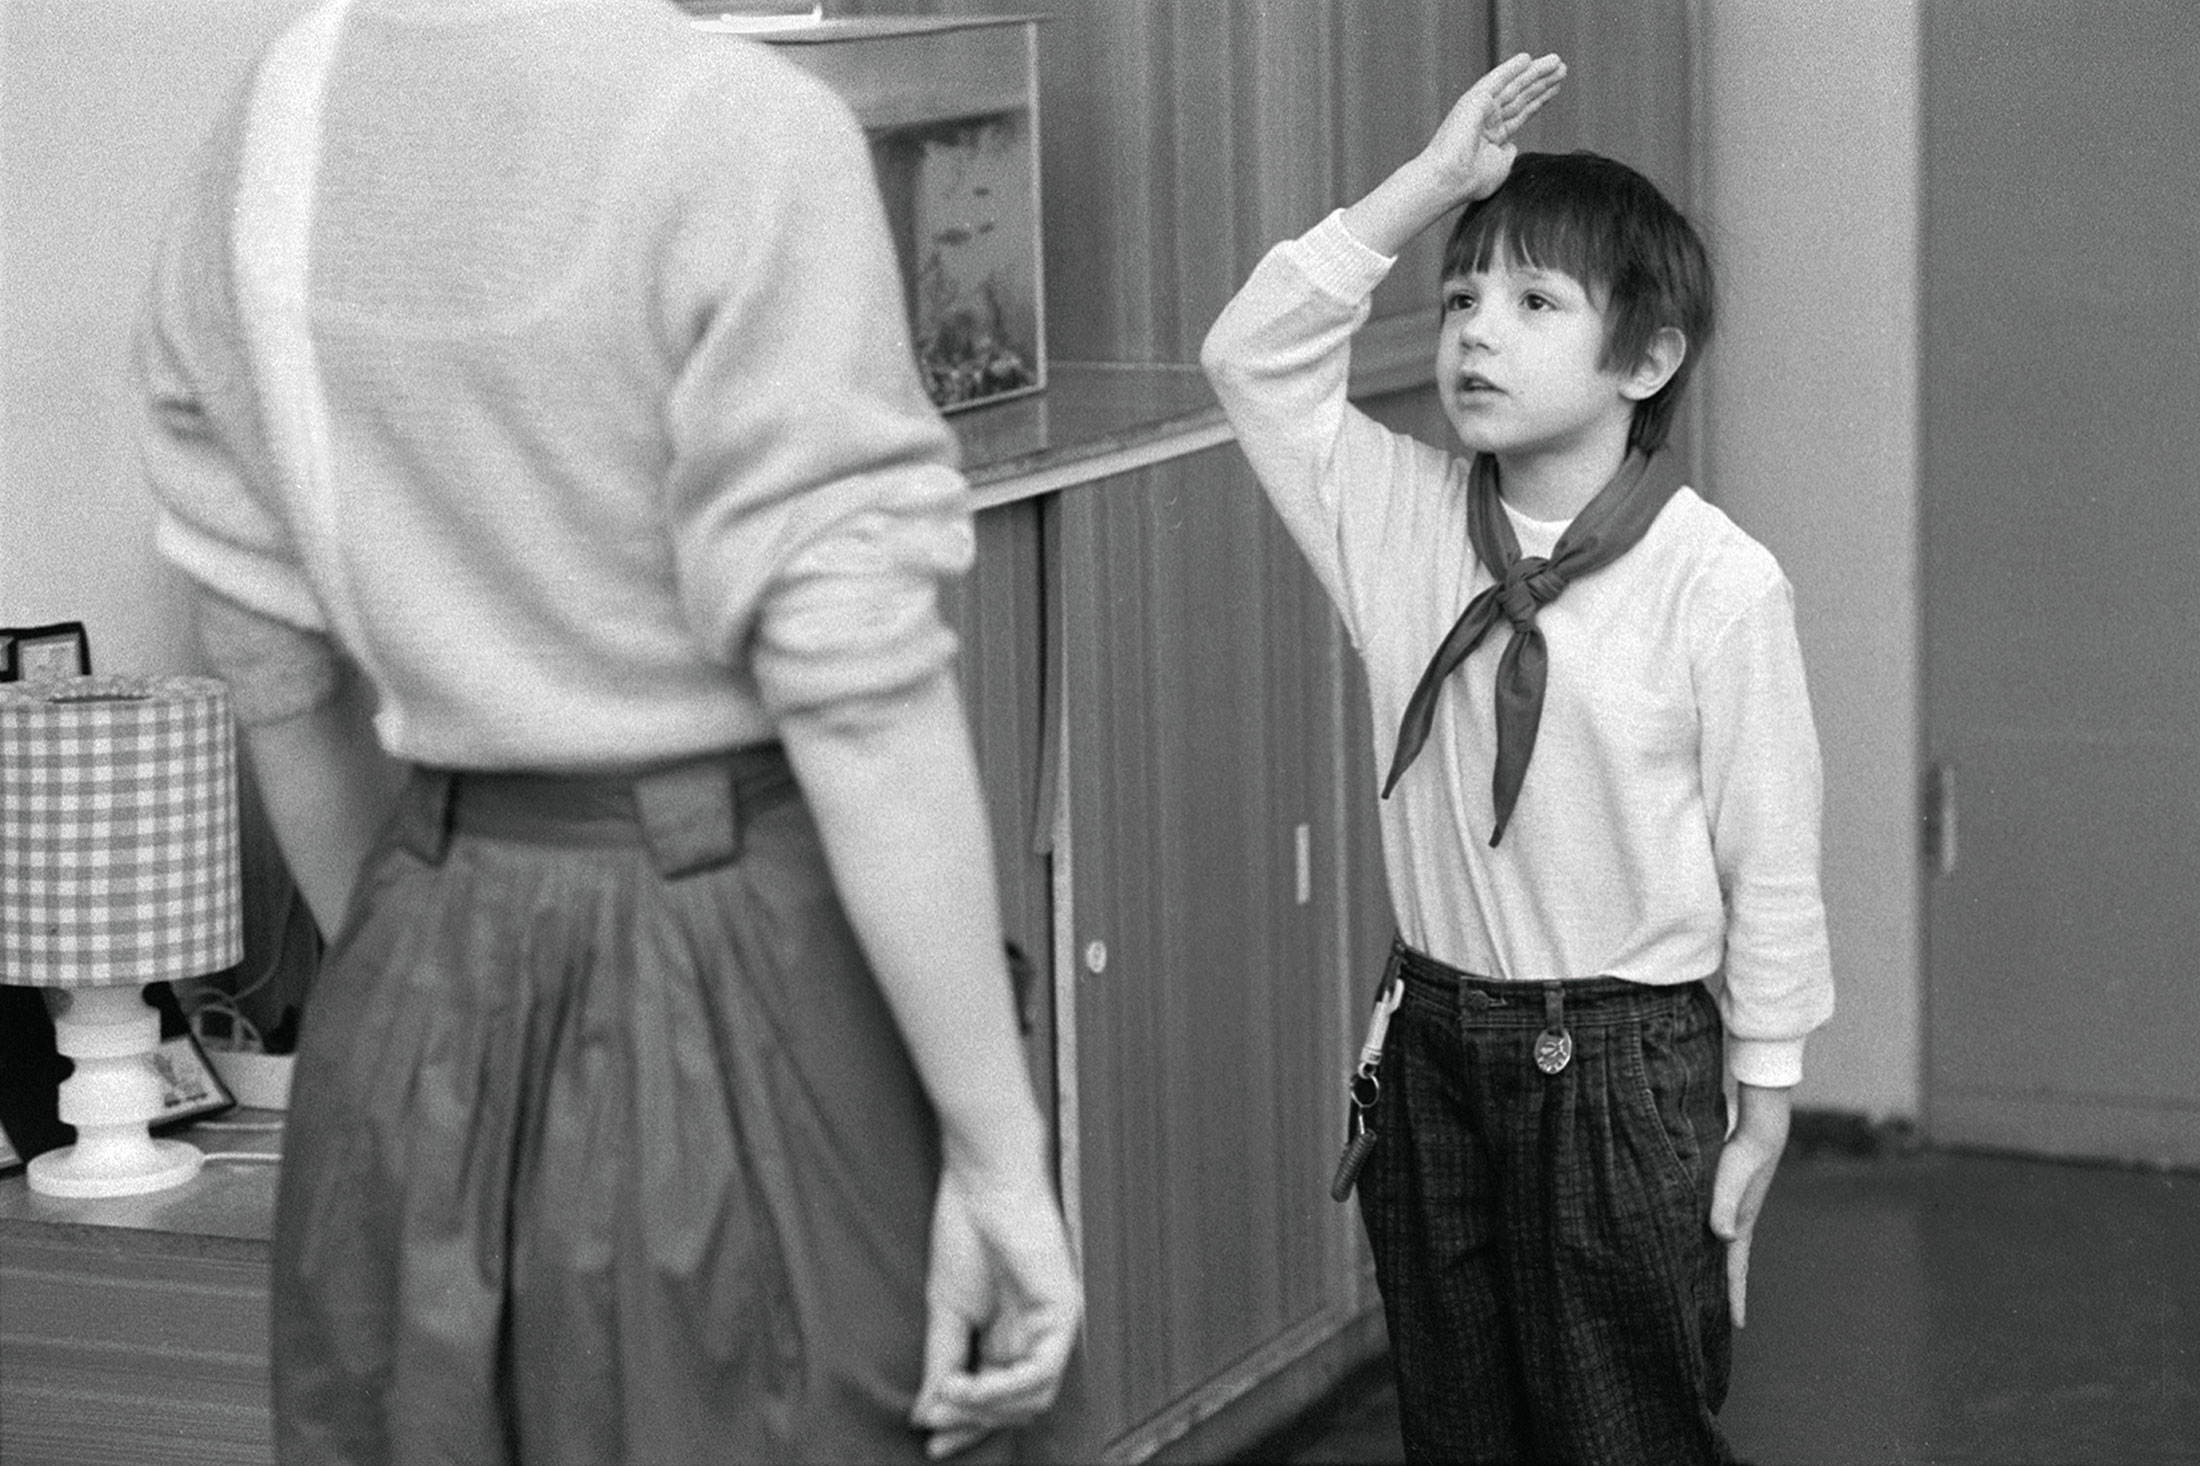 First graders at the 10th secondary school in Berlin-Prenzlauer Berg, 1978. The young pioneer signals to the teacher that the class is ready for lessons with the pioneer greeting.